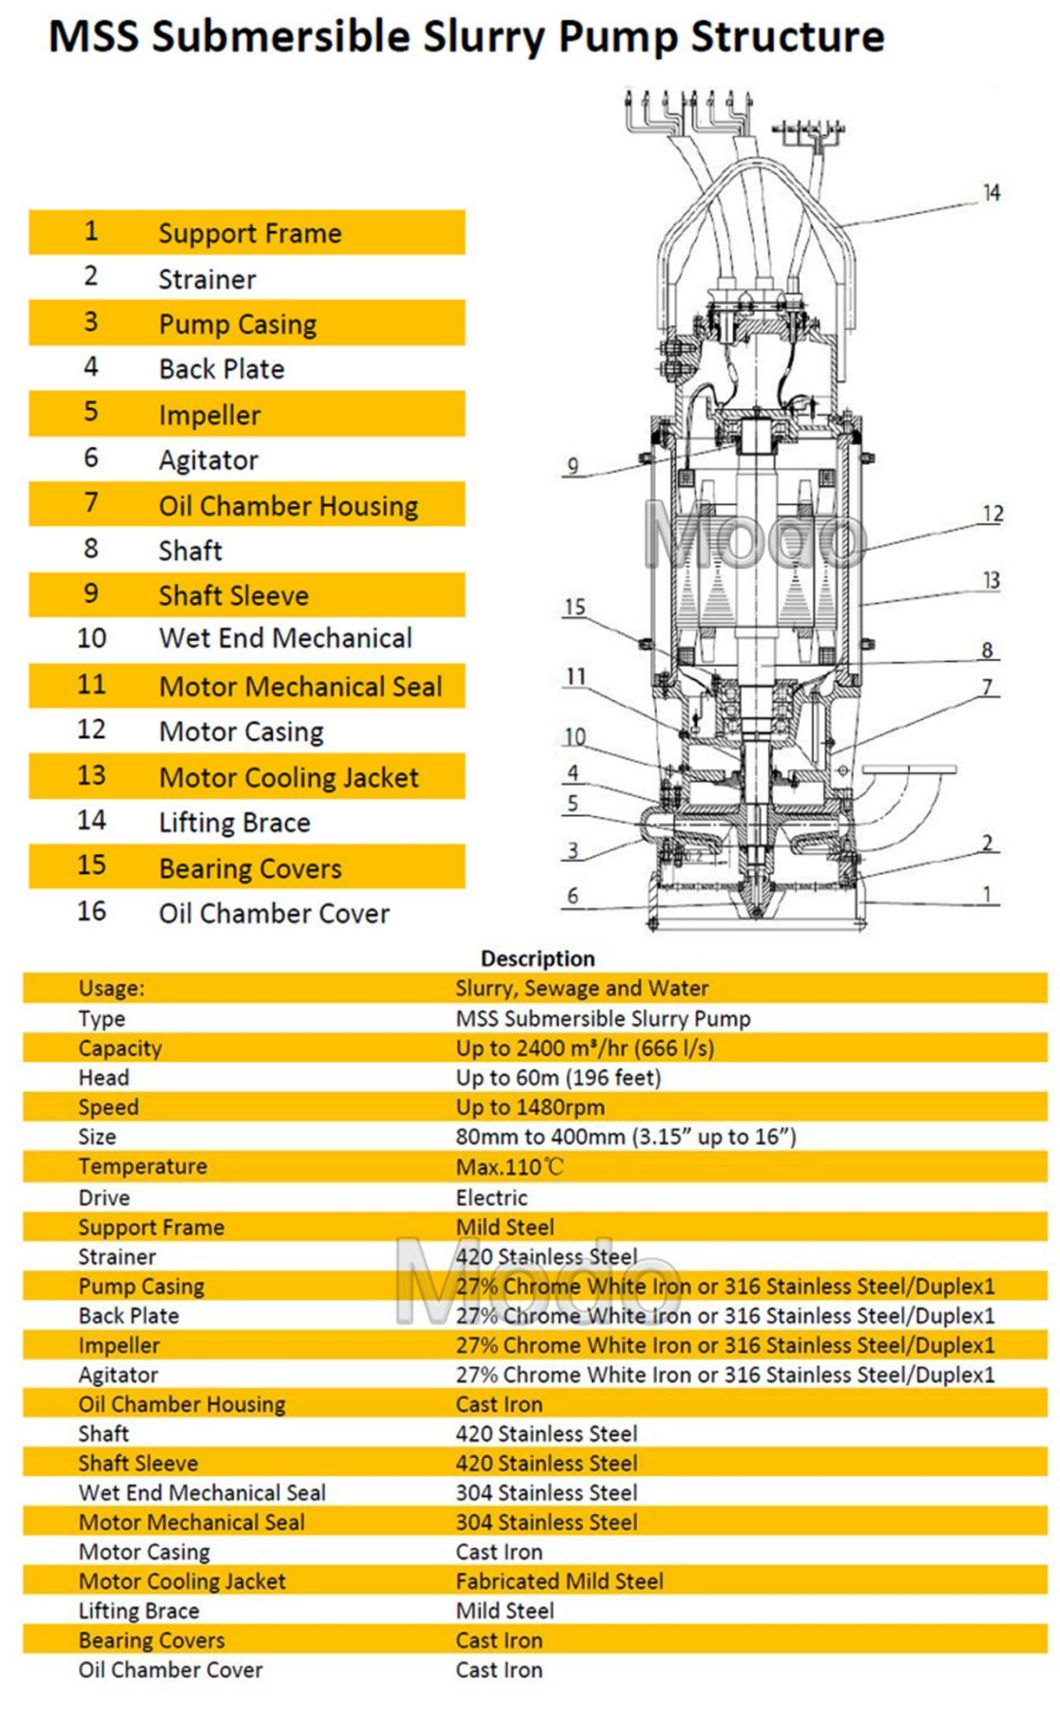 The Best Heavy Duty Electric Driven Centrifugal Submersible Slurry Pump for Industry